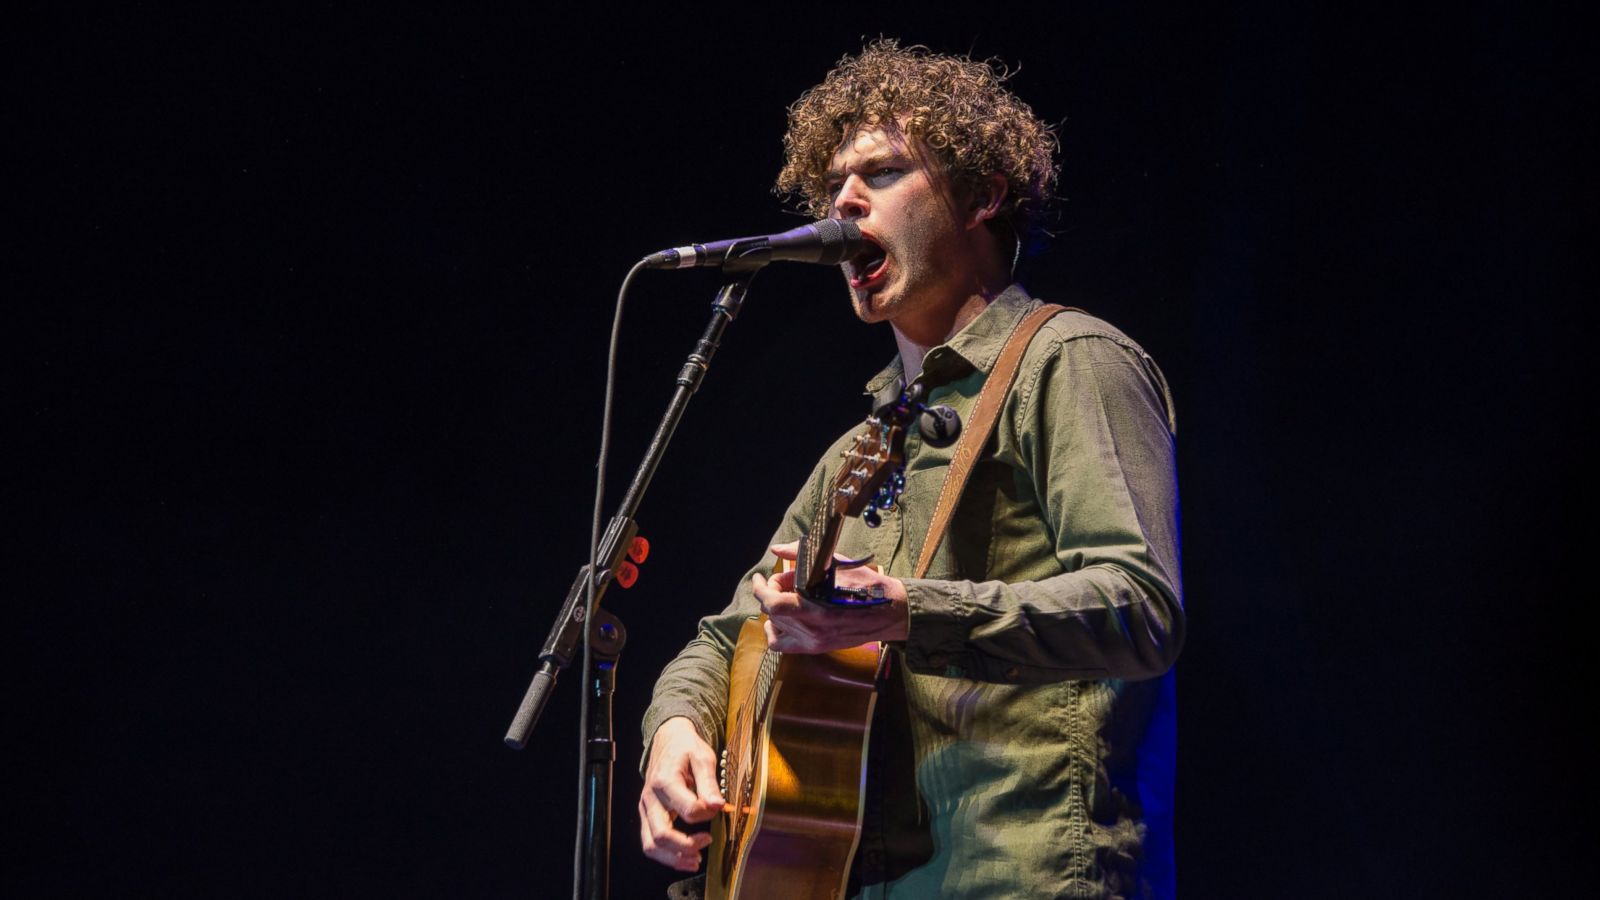 Meet Vance Joy, The Former Law Student Turned Opening Act For Taylor Swift